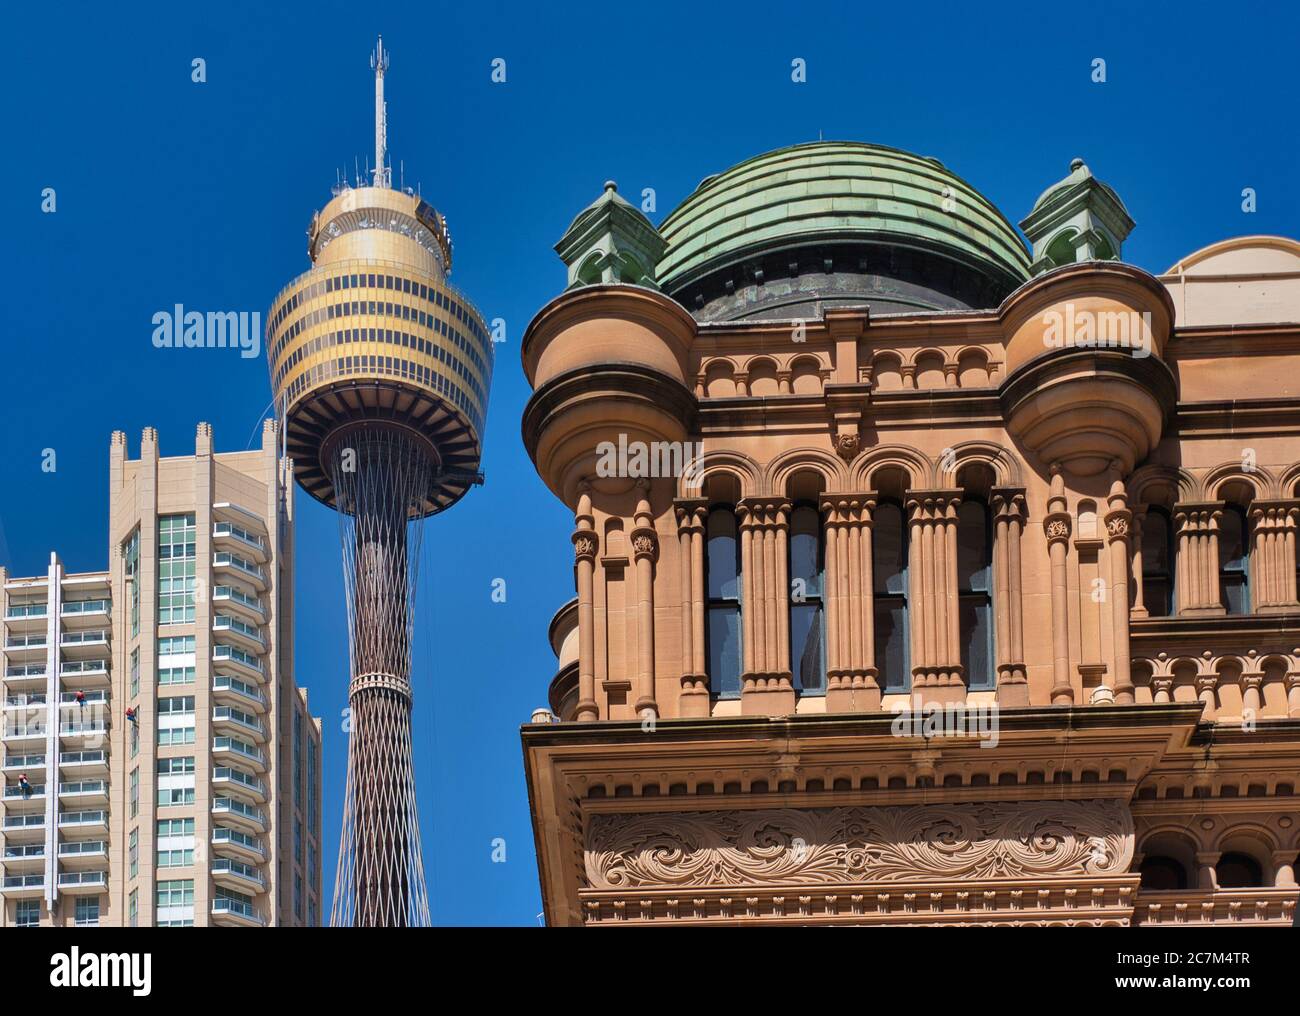 Architecture old and new - the Queen Victoria Building at left with modern Sydney Tower in the background, Sydney, NSW., Australia. Stock Photo